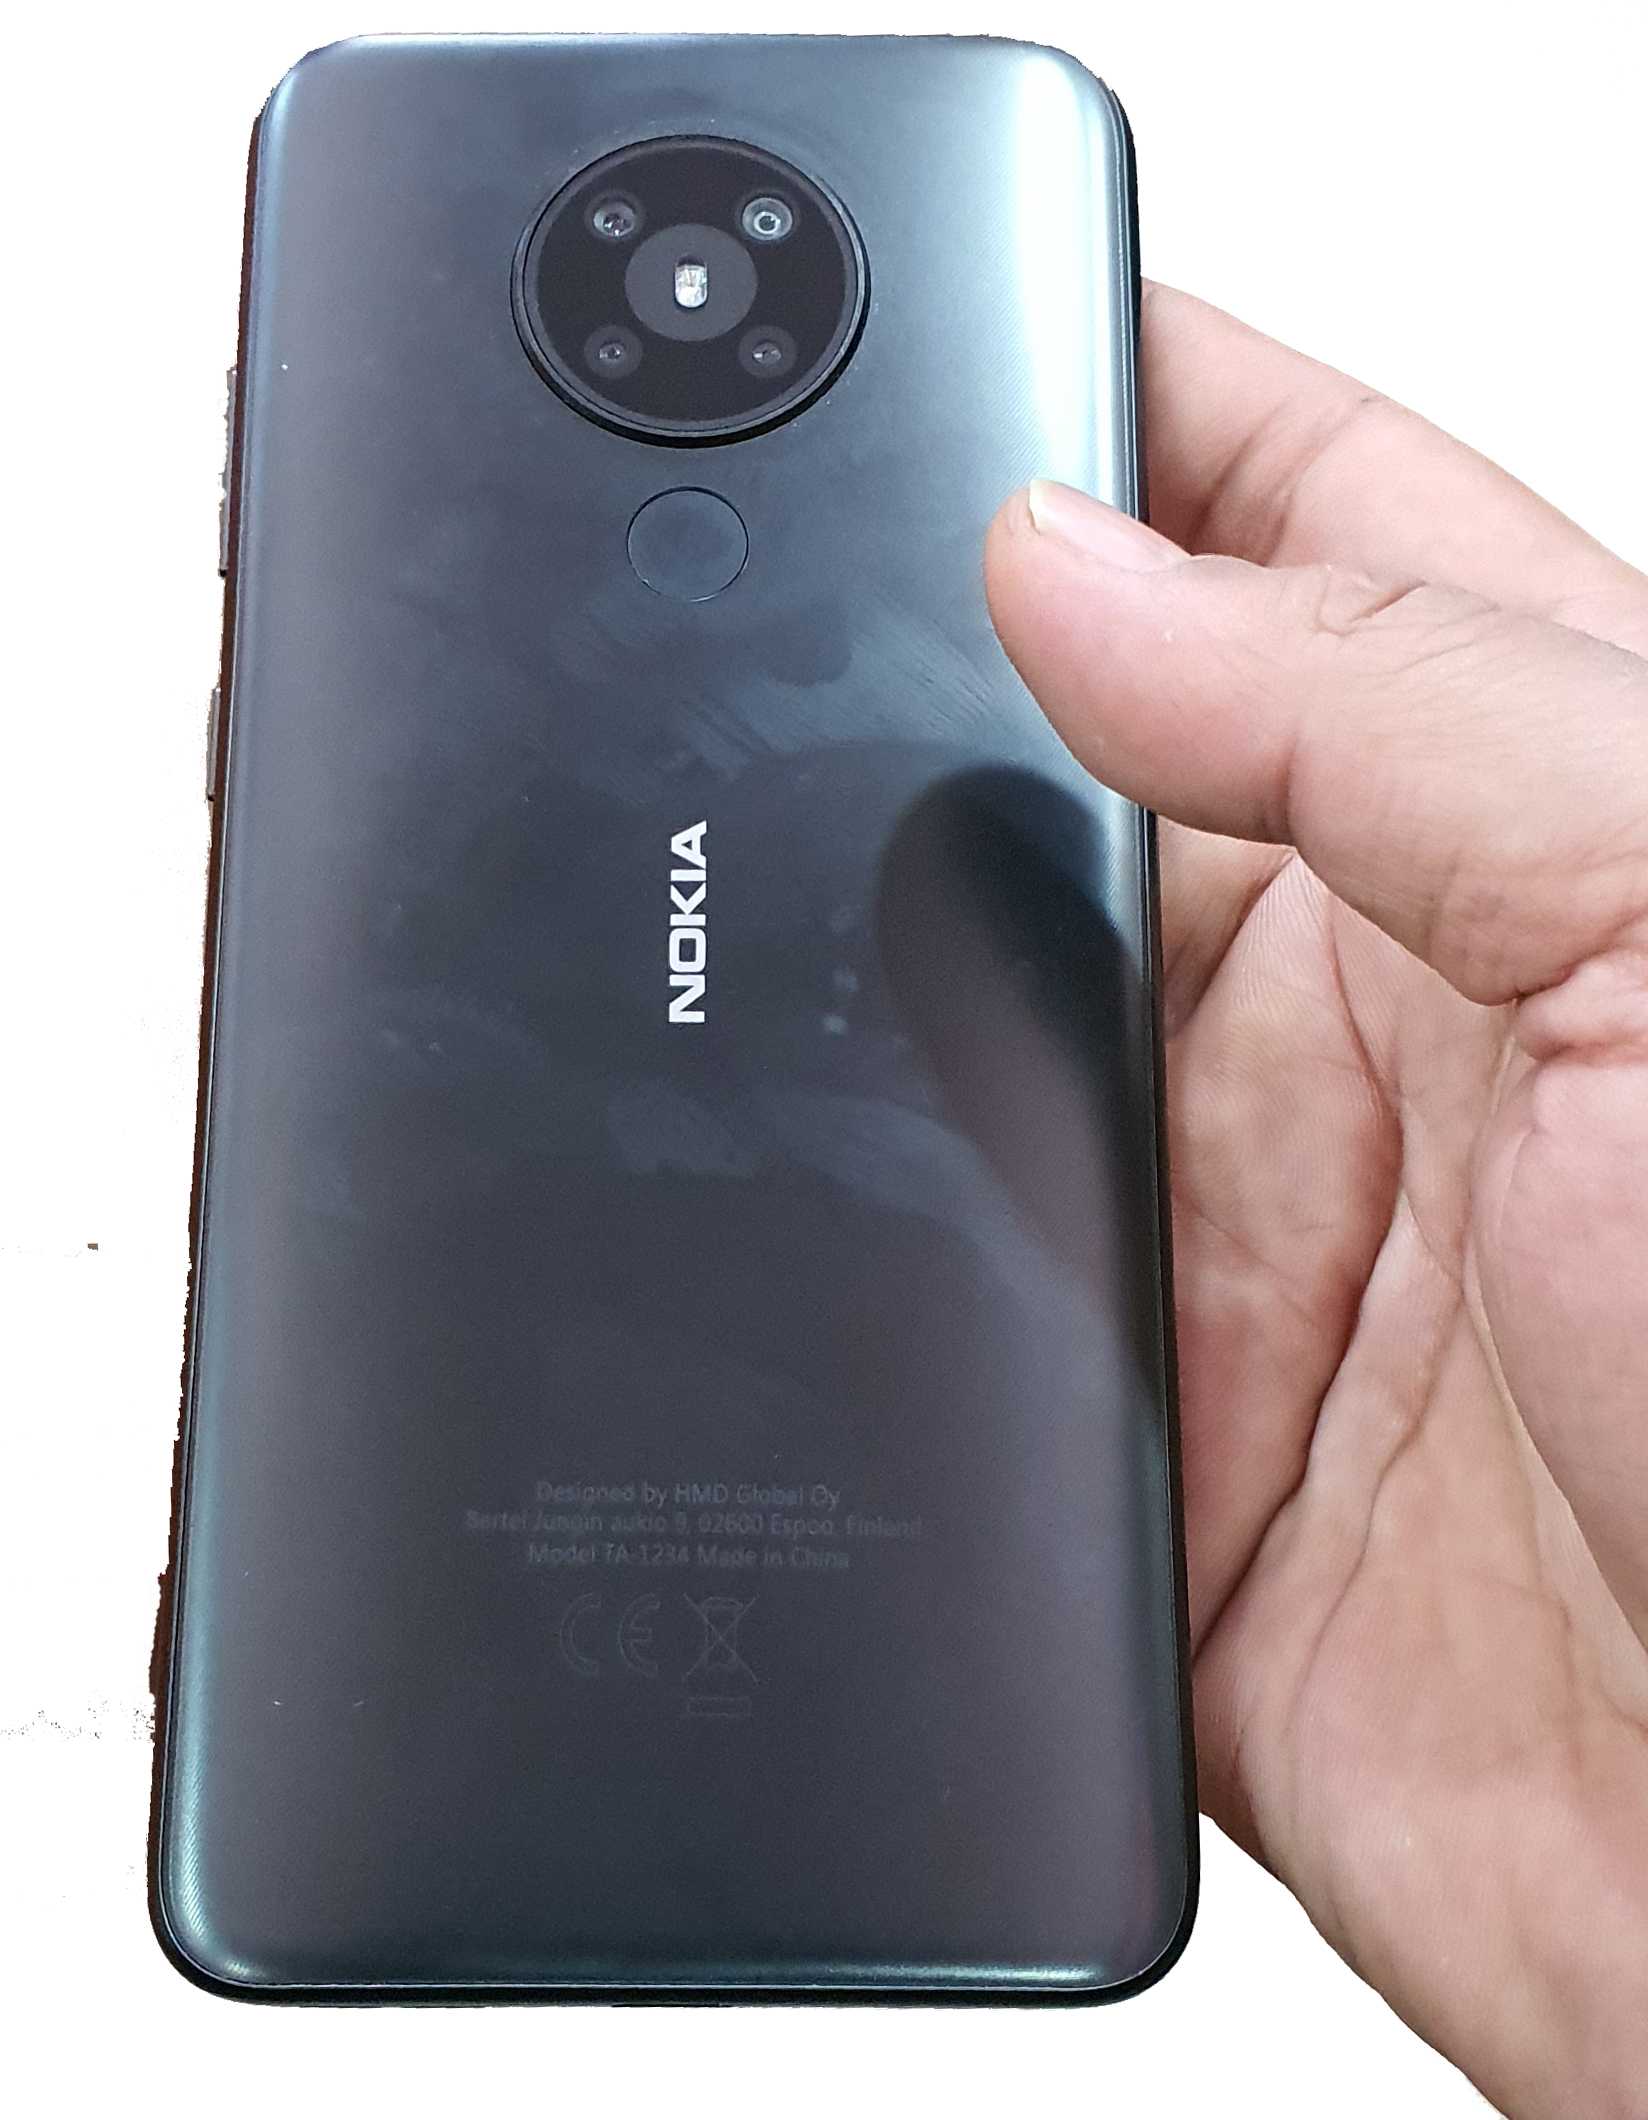 Exclusively Nokia 5 3 Specifications And Pricing Leaked Tech News N Gadgets